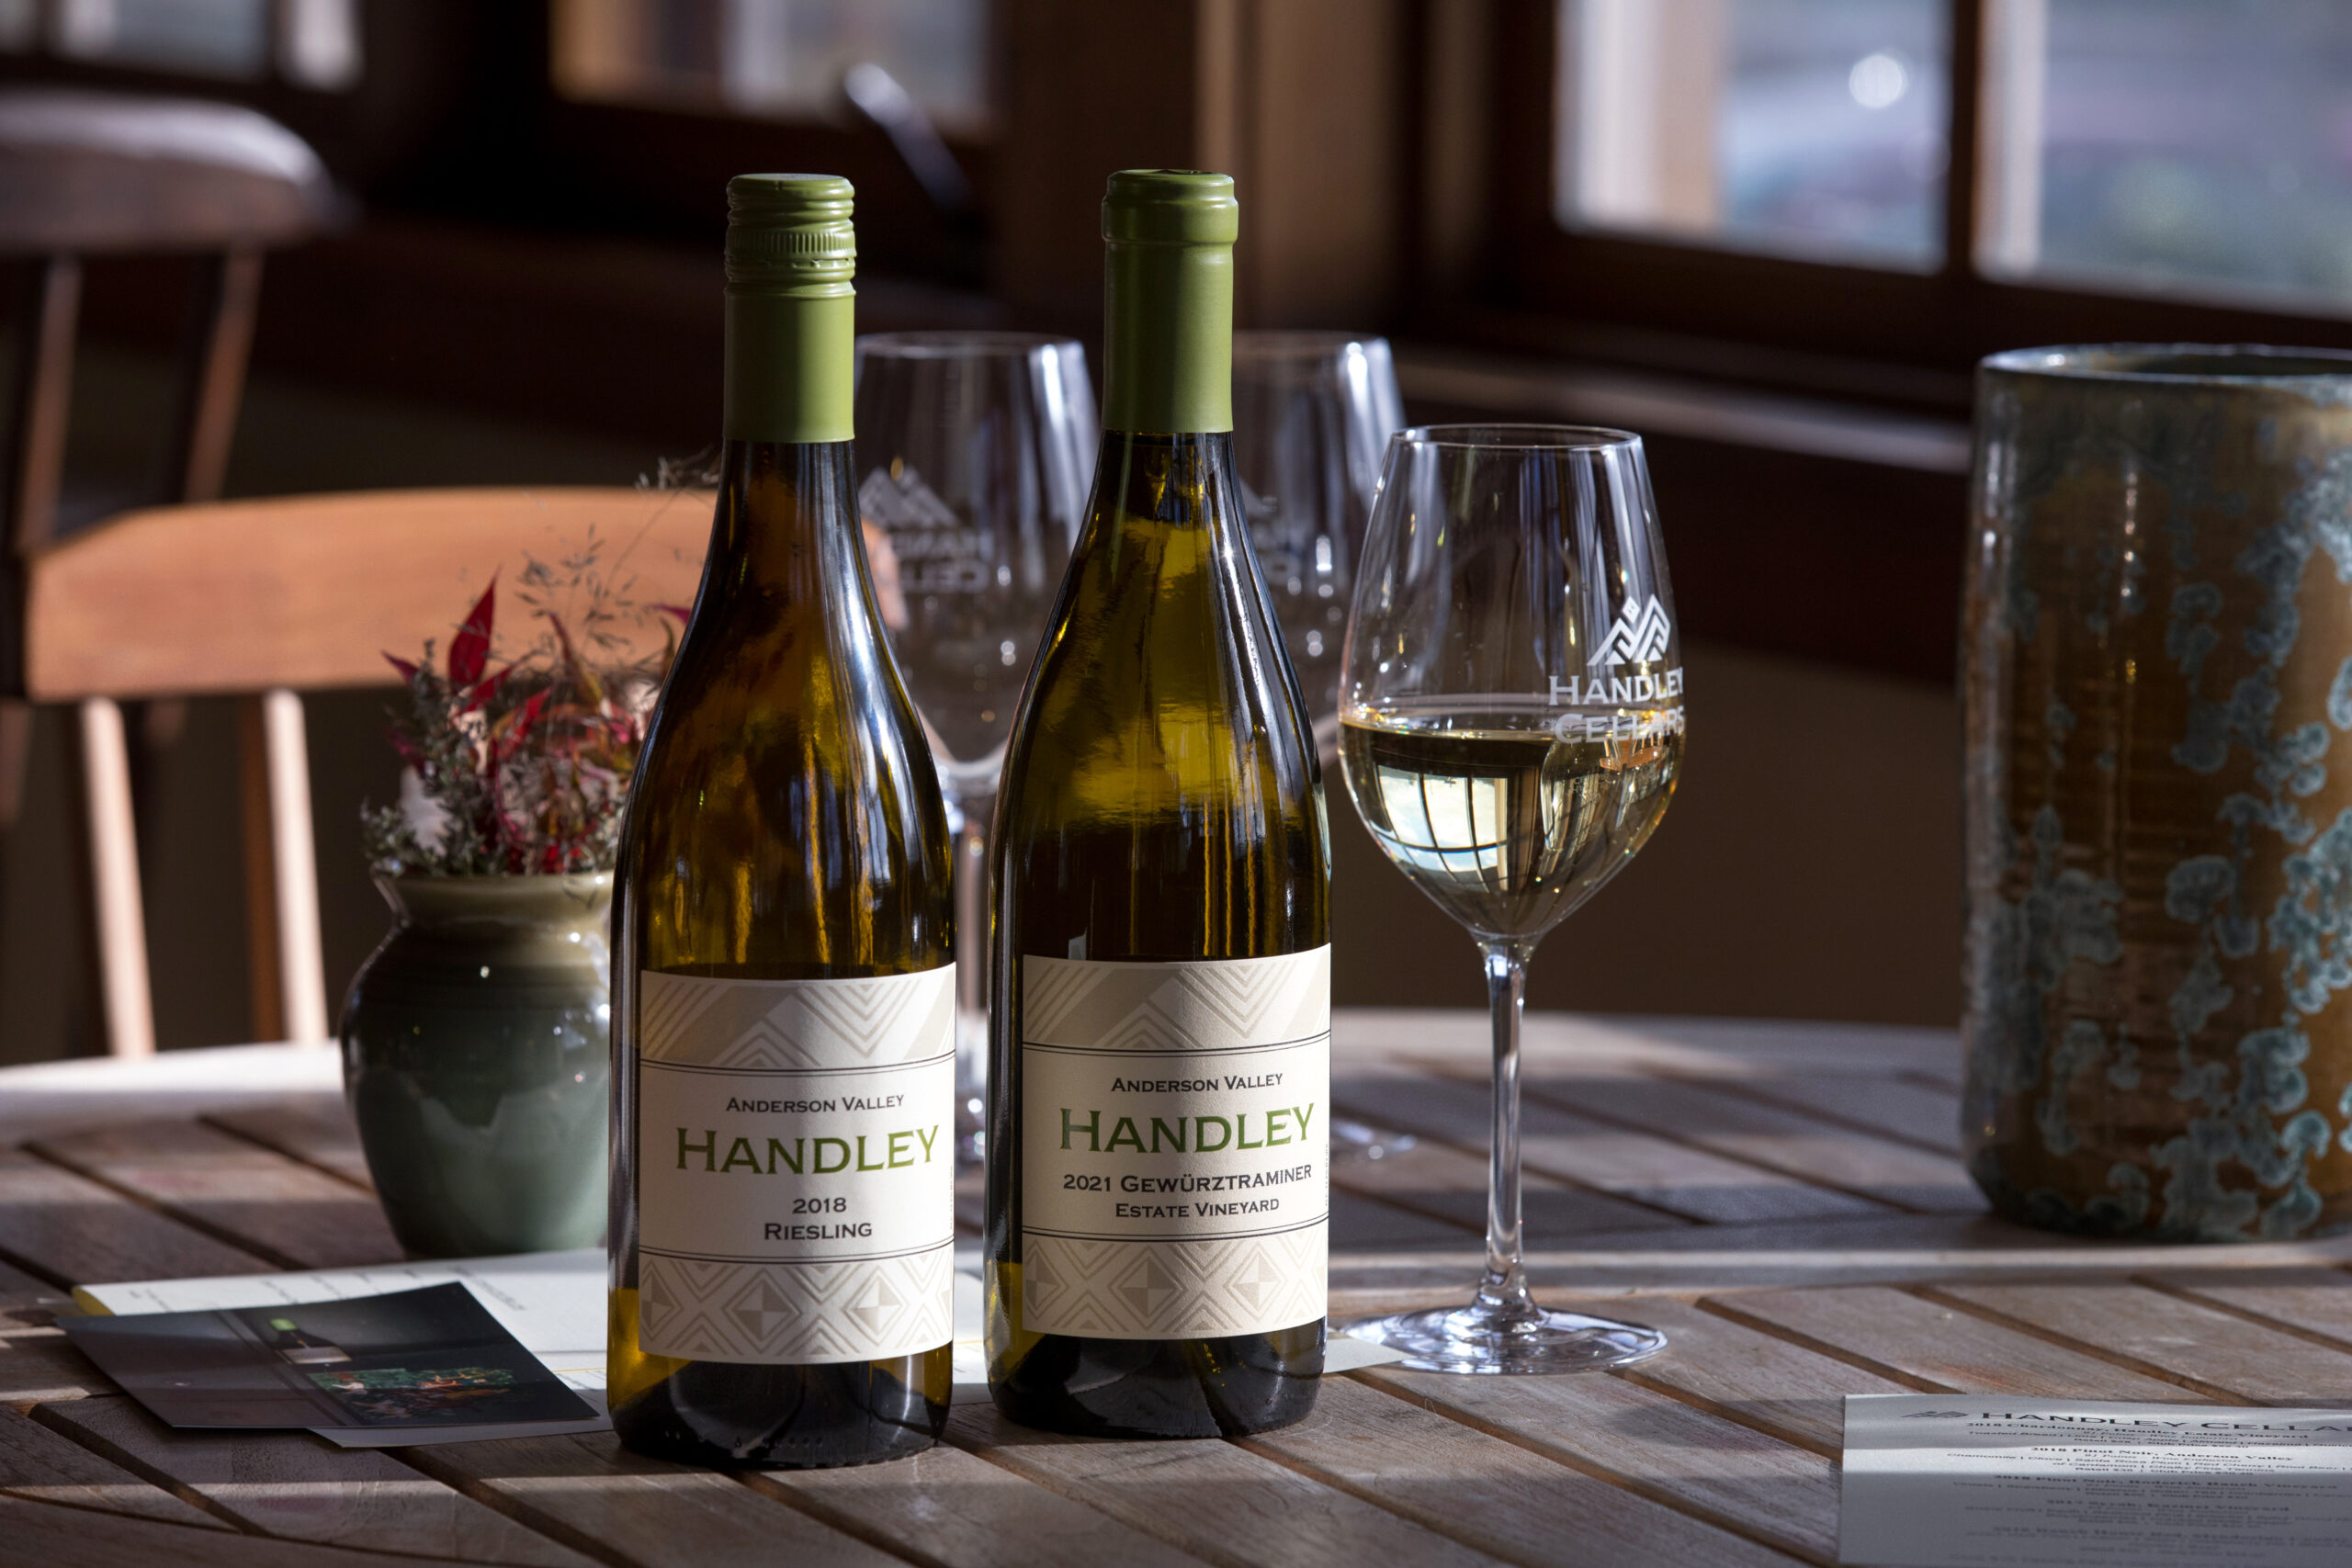 Handley's 2018 Riesling and 2021 Gewürztraminer are shown in the Handley Cellars tasting room, located in the Anderson Valley, Friday, February 10, 2023, in Philo. (Darryl Bush / For The Press Democrat)